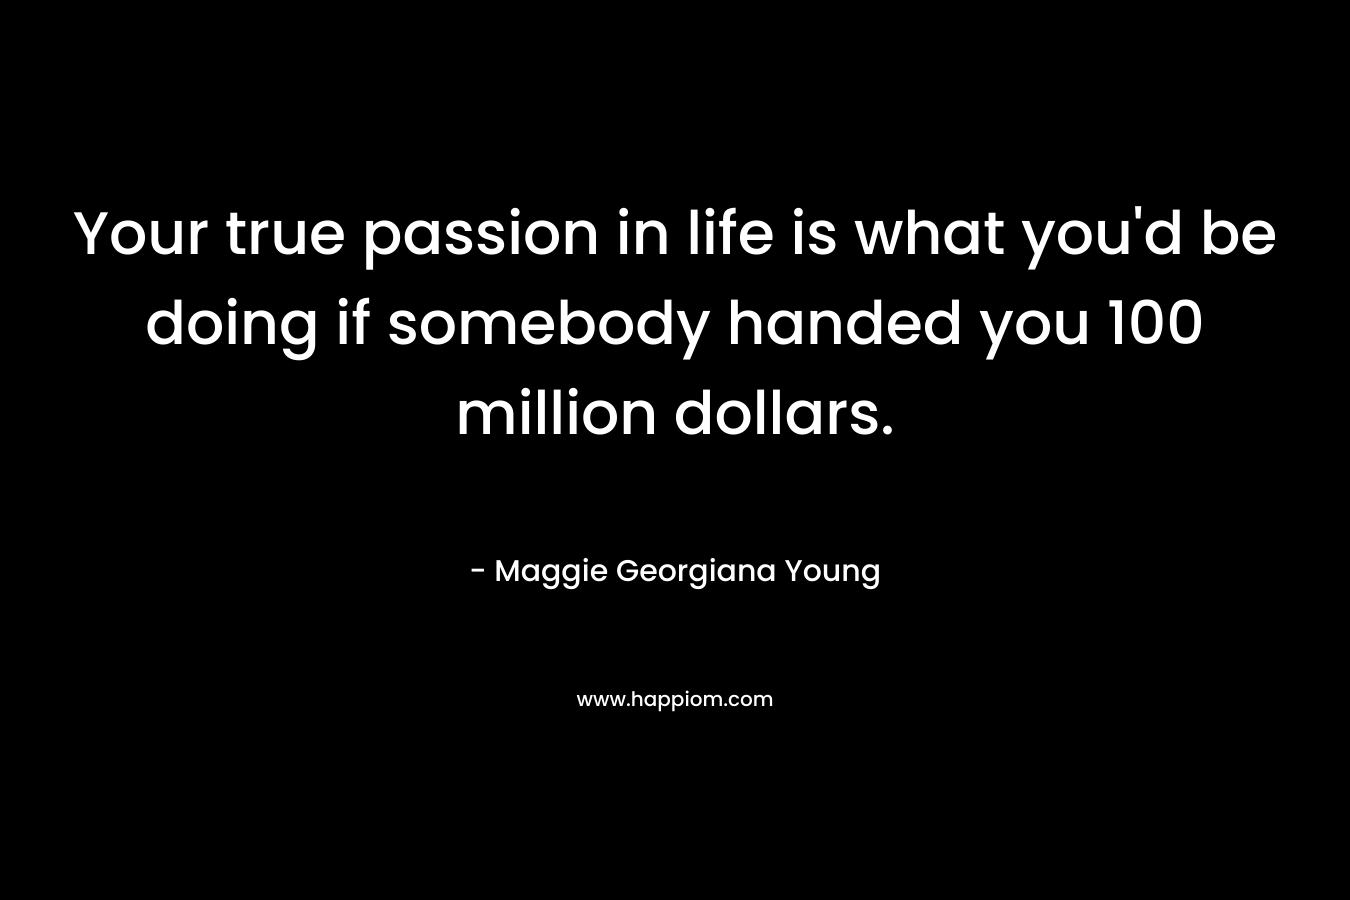 Your true passion in life is what you’d be doing if somebody handed you 100 million dollars. – Maggie Georgiana Young